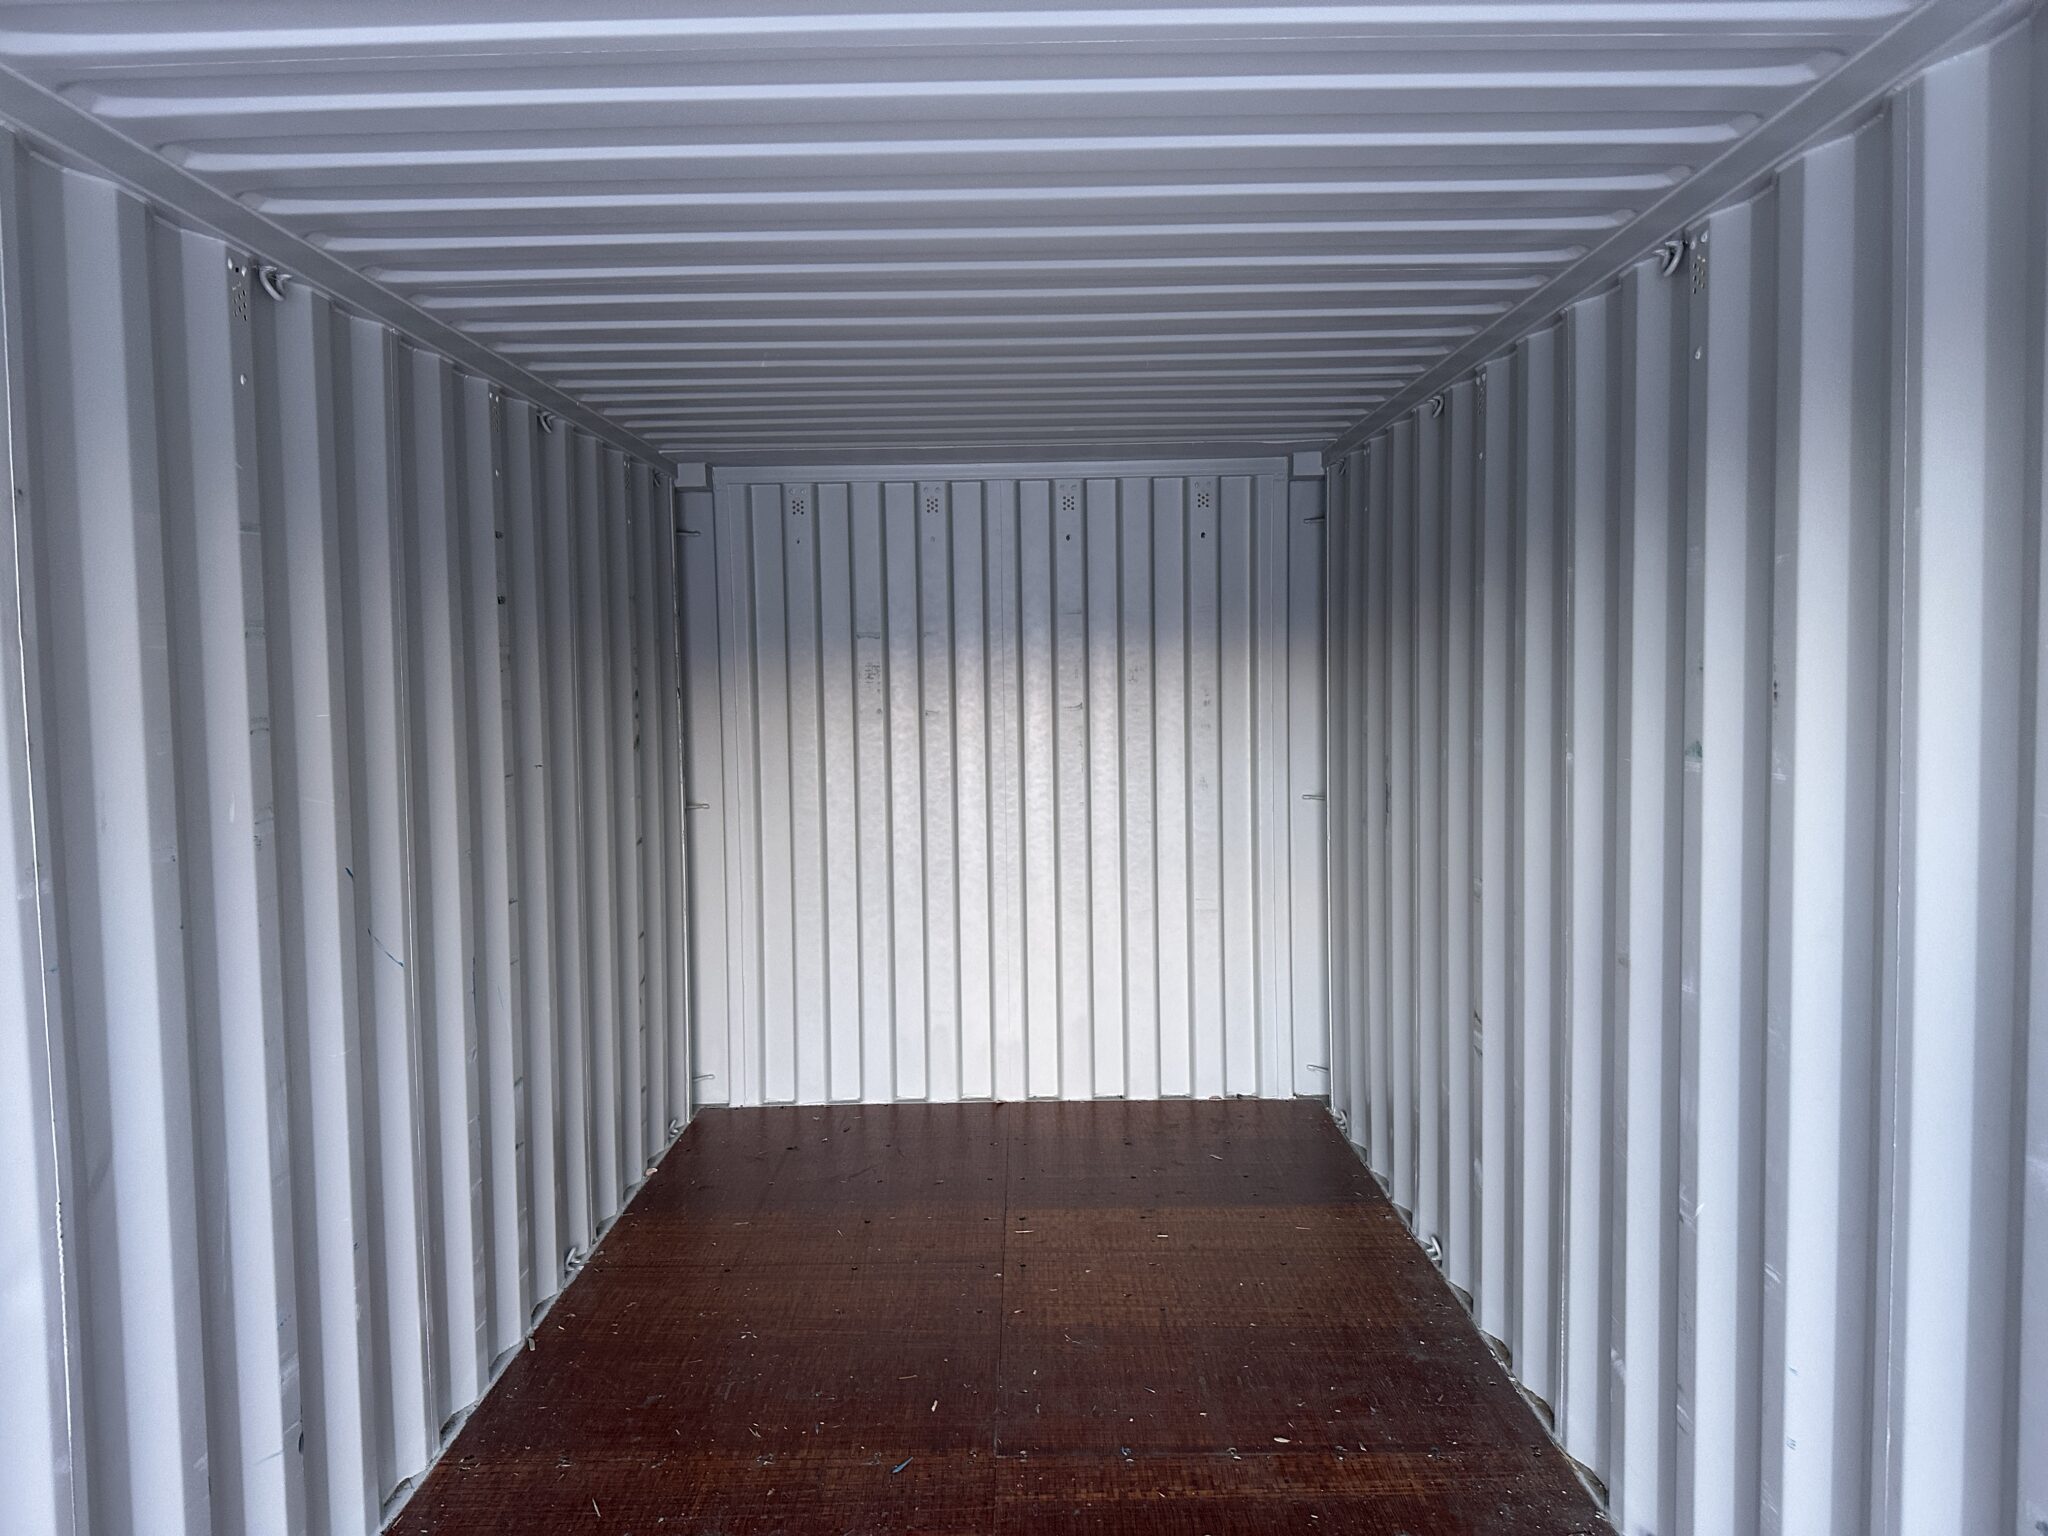 https://upnorthstoragecontainers.com/wp-content/uploads/IMG_7663-scaled.jpg